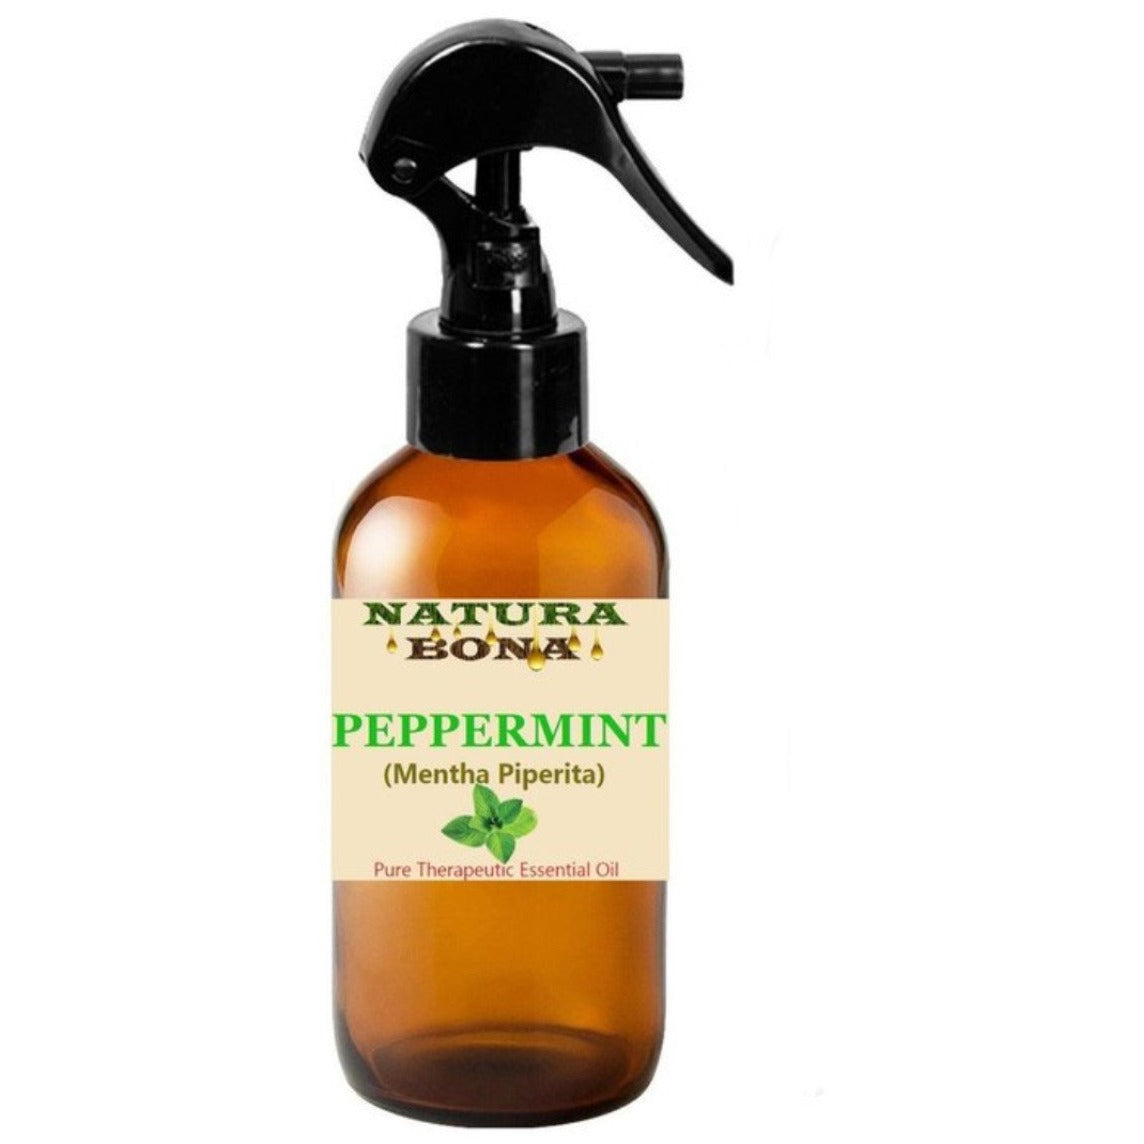 peppermint spray for mice and spiders